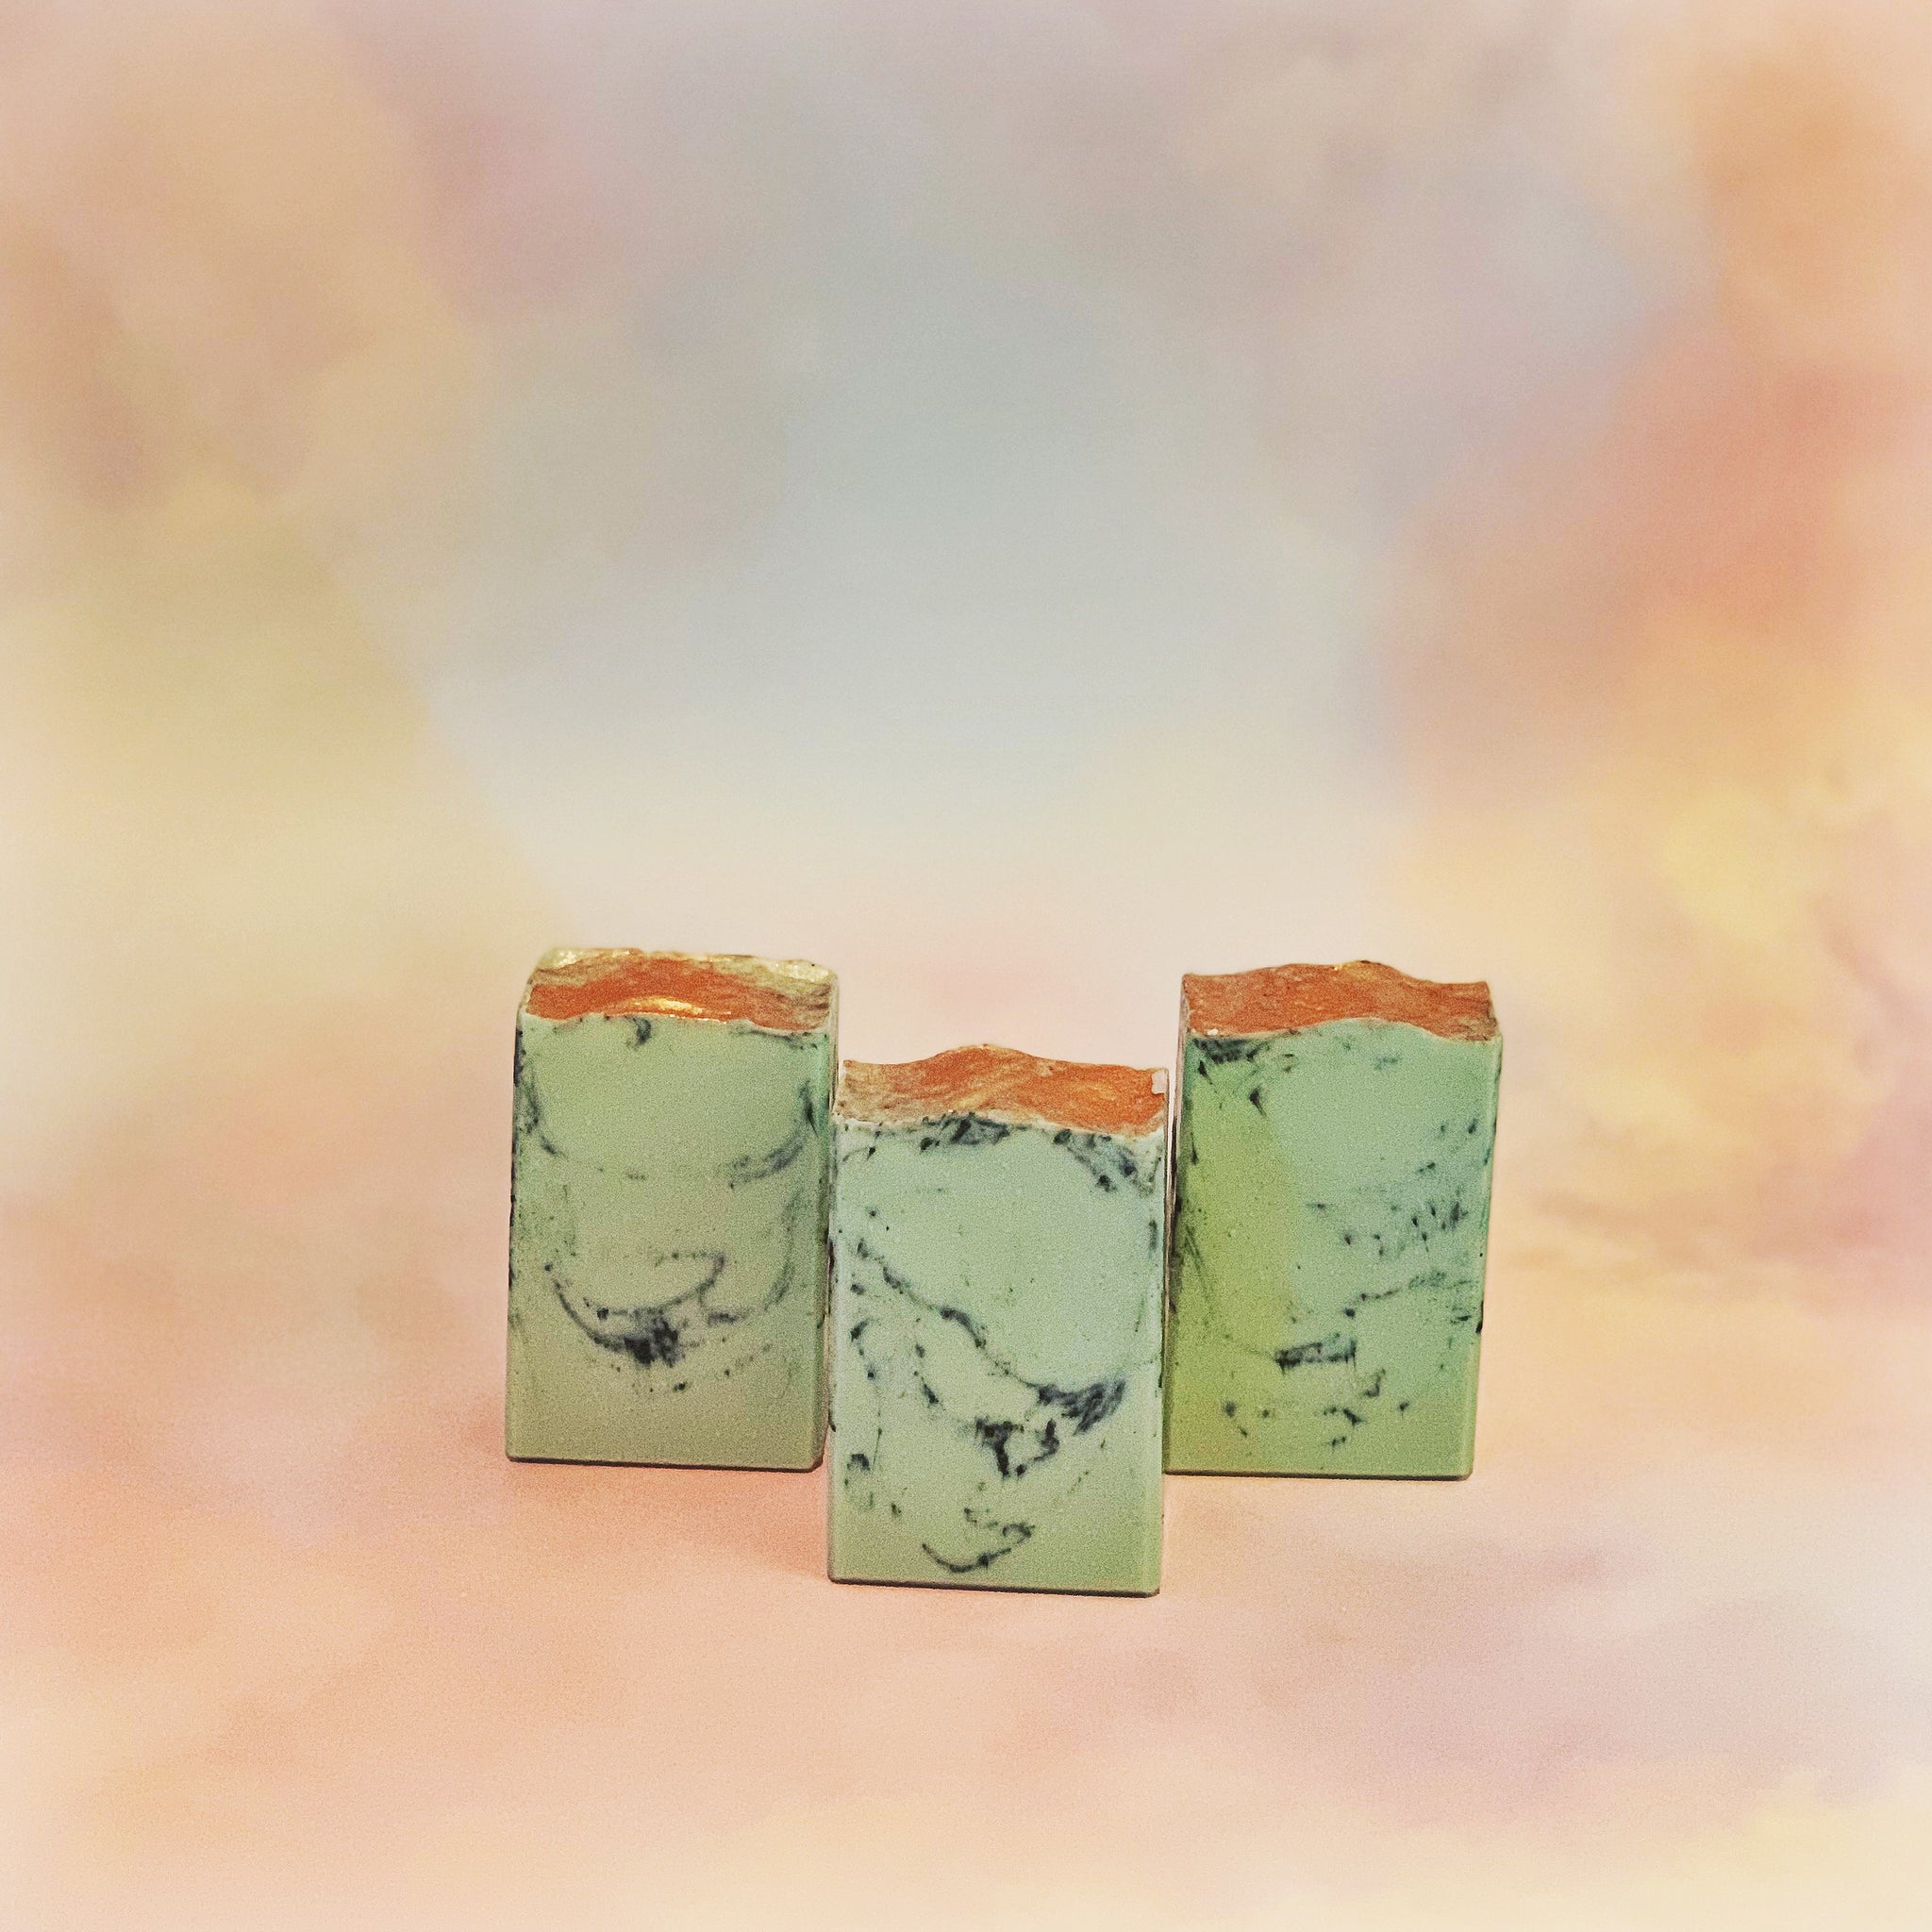 6 oz Moonstone Cold Process Soap - Madeluv